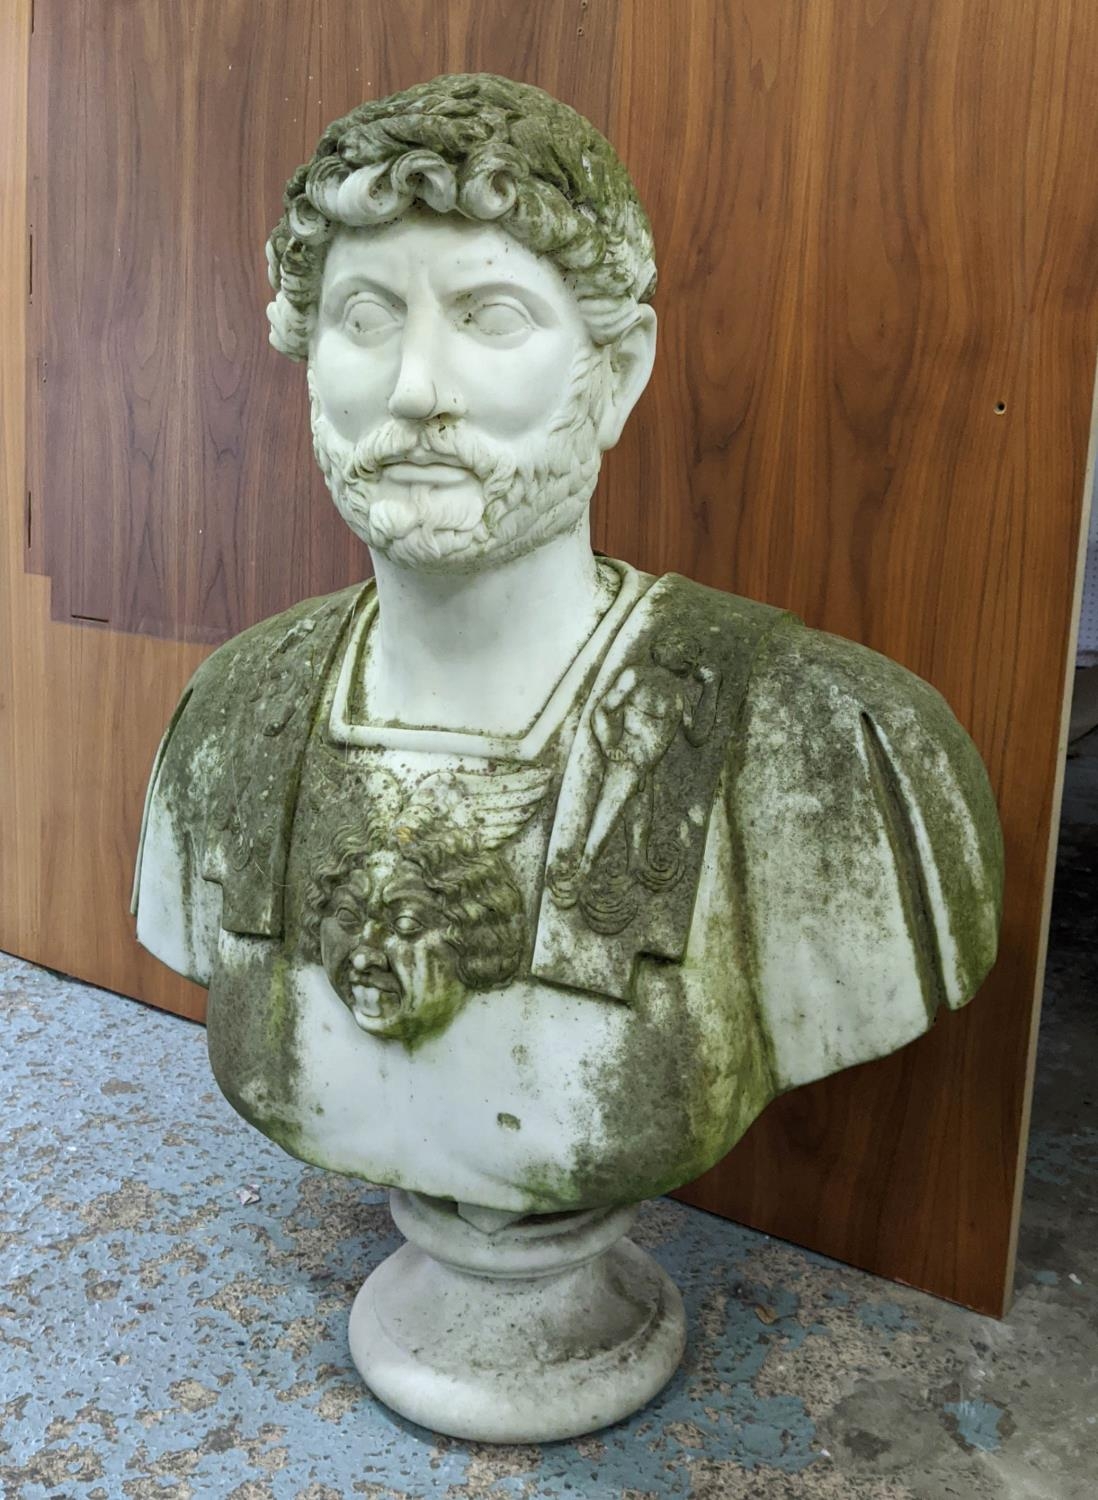 AFTER THE ANTIQUE BUST OF HADRIAN, marble, 89cm H.